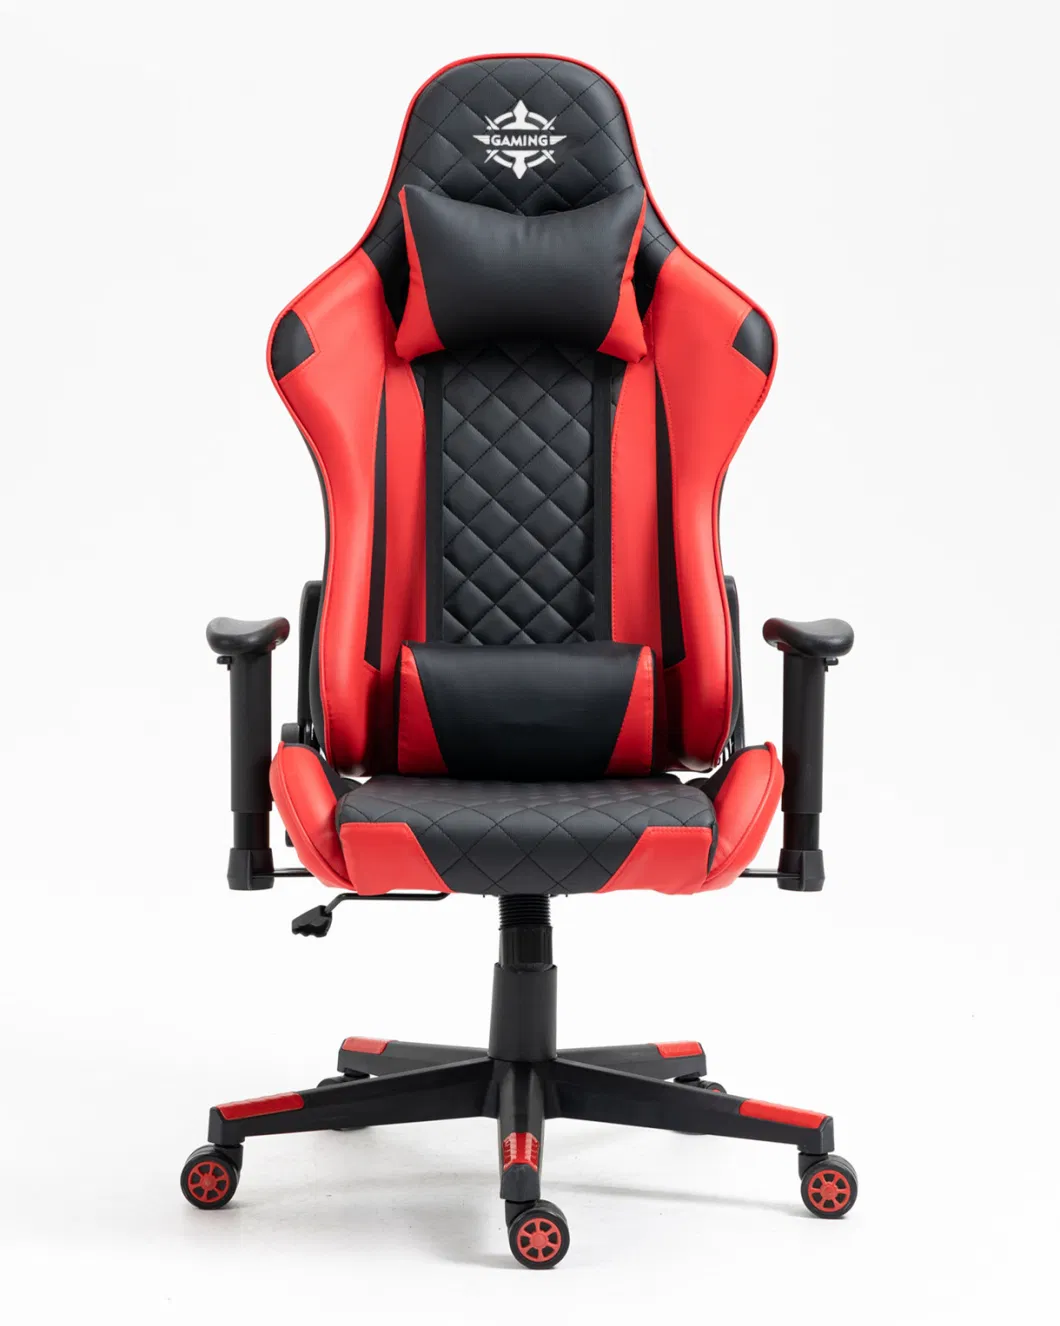 Classic Diamond Quilting High Back Gaming Chair Ergonomic Office Working Chair